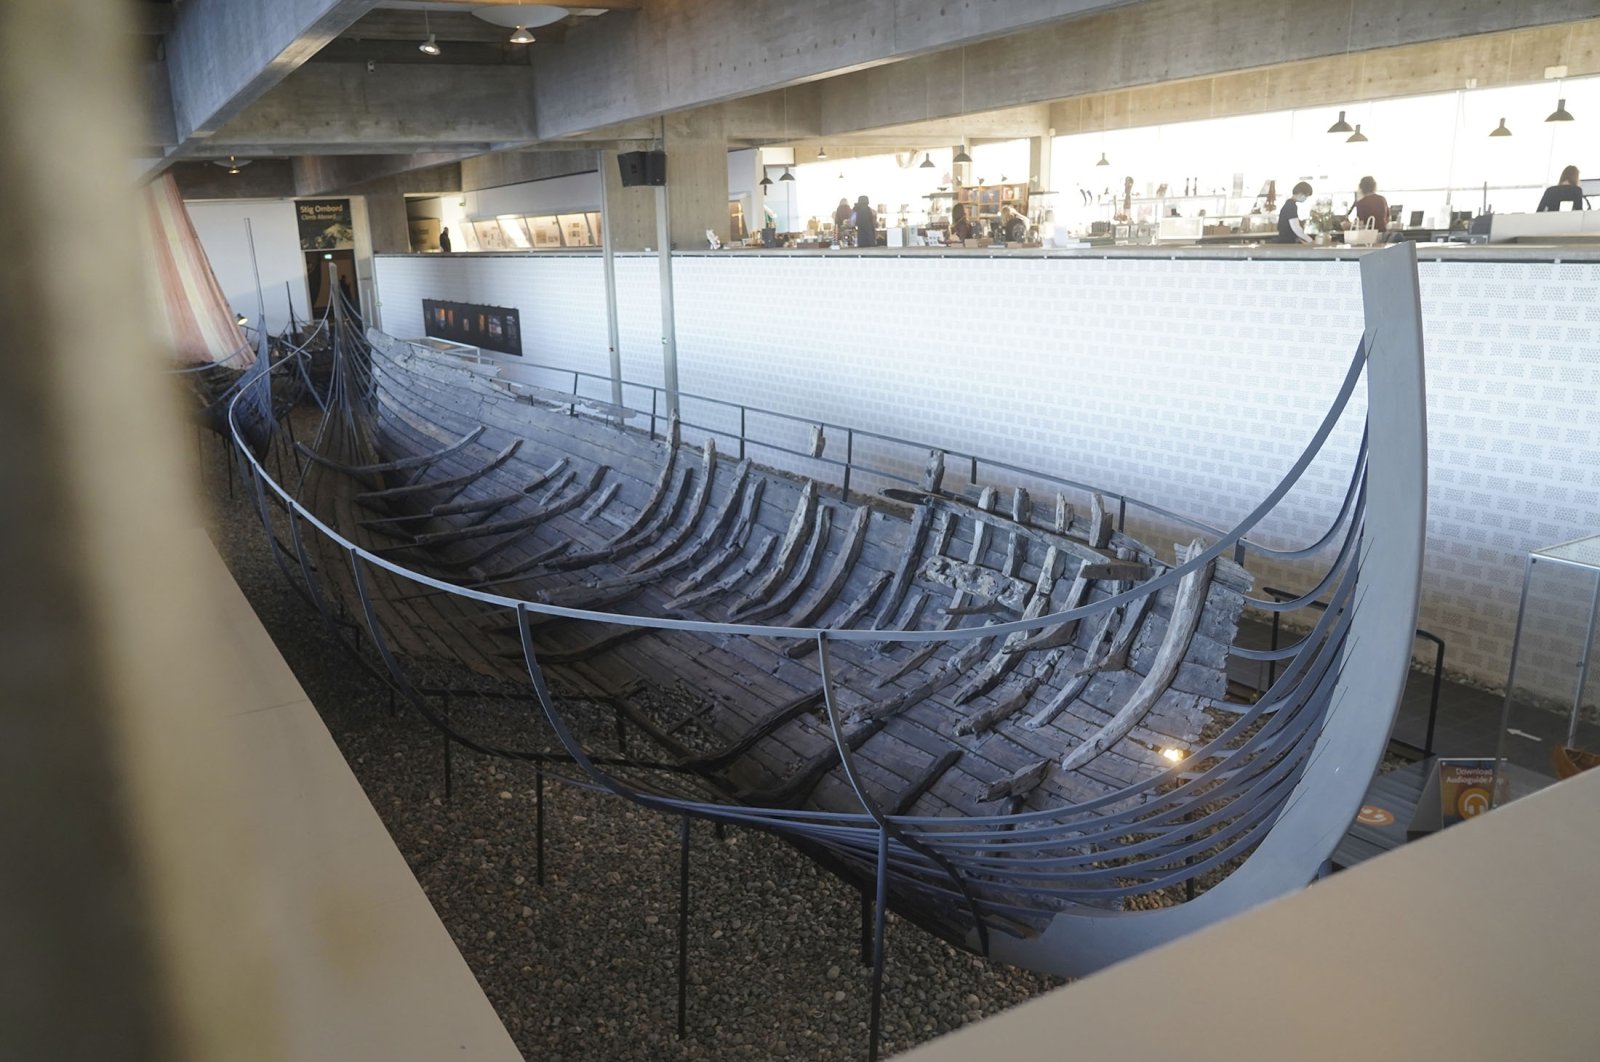 An 11th century, 15-meter (49-foot) Viking sea-faring trading vessel, built in the Nordic clinker boat tradition, sits on display at the Viking Ship Museum in Roskilde, Denmark, Jan. 17, 2022. (AP Photo)